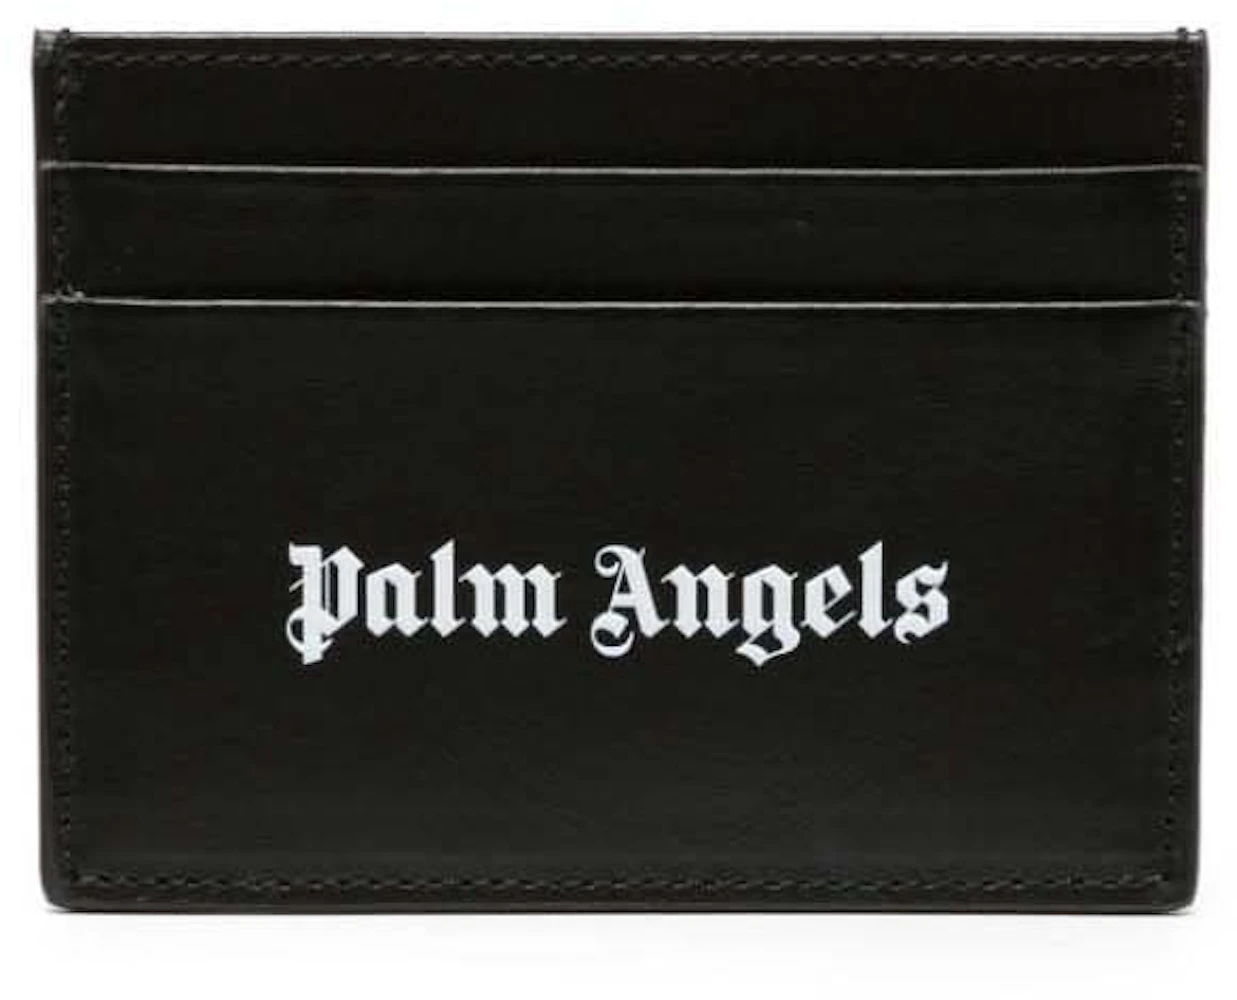 Palm Angels Logo-Print Leather Card Holder Black in Calfskin Leather - GB